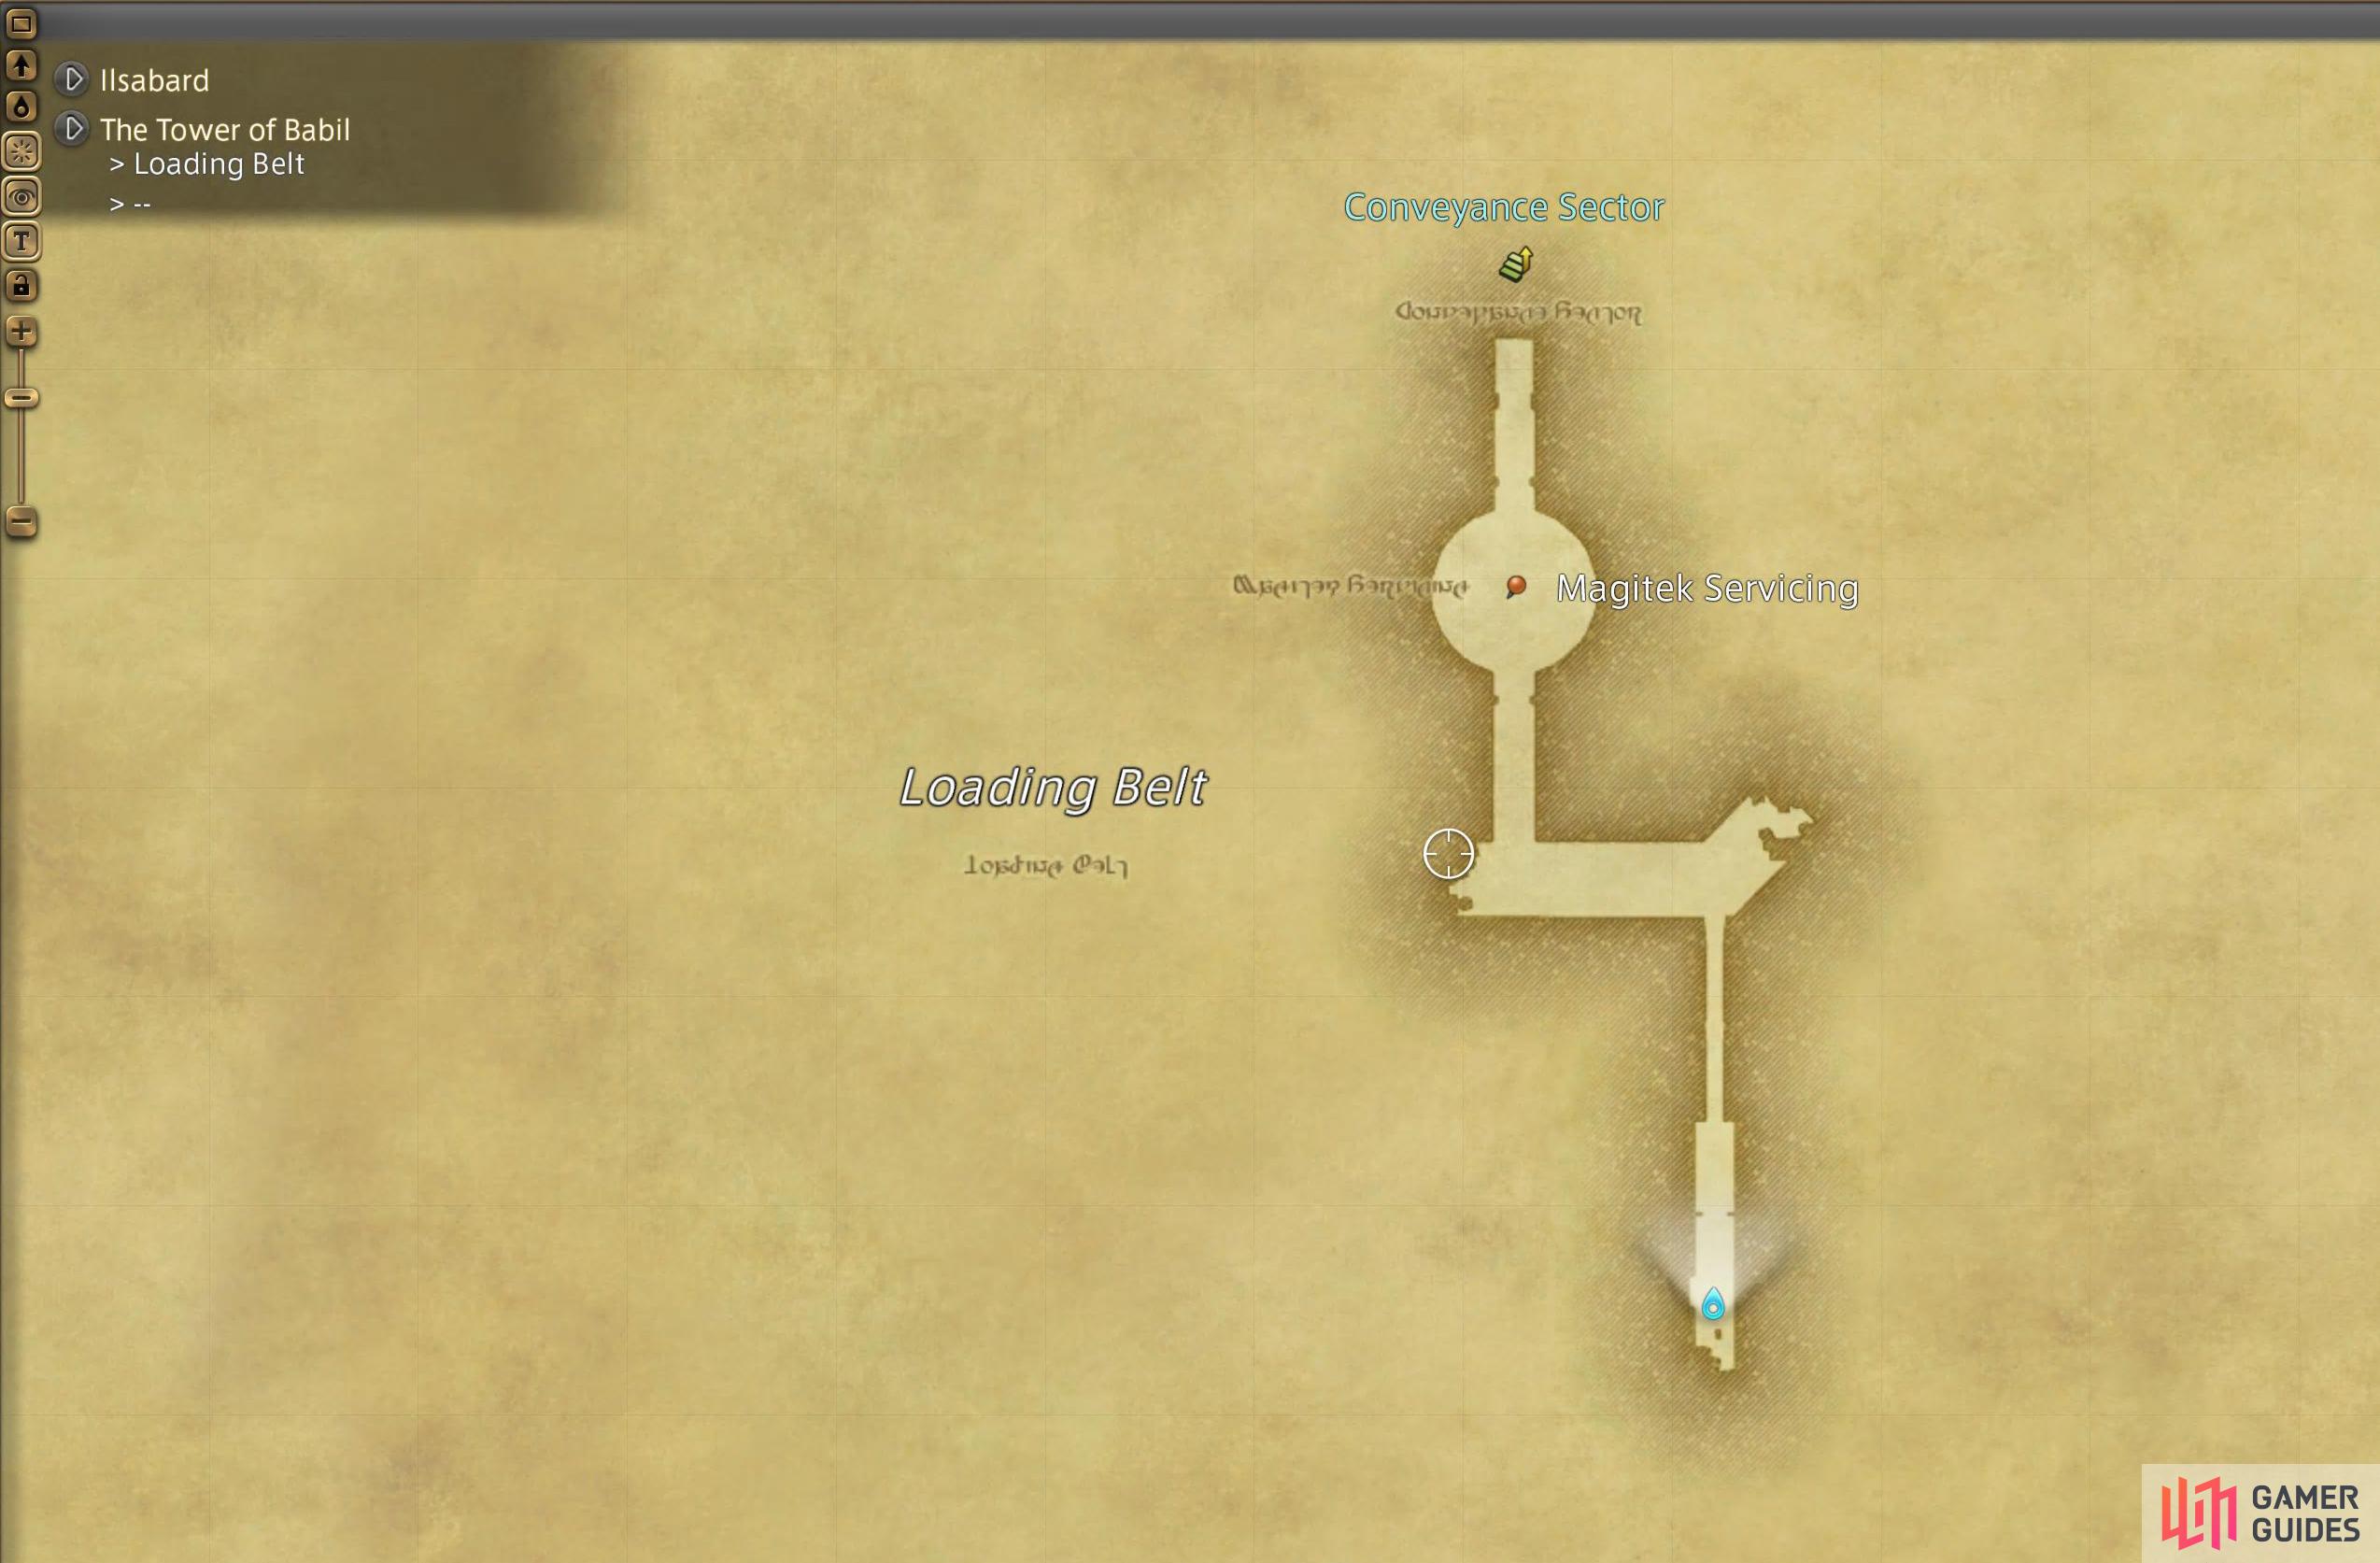 Map 2/5 for the Tower of Babil